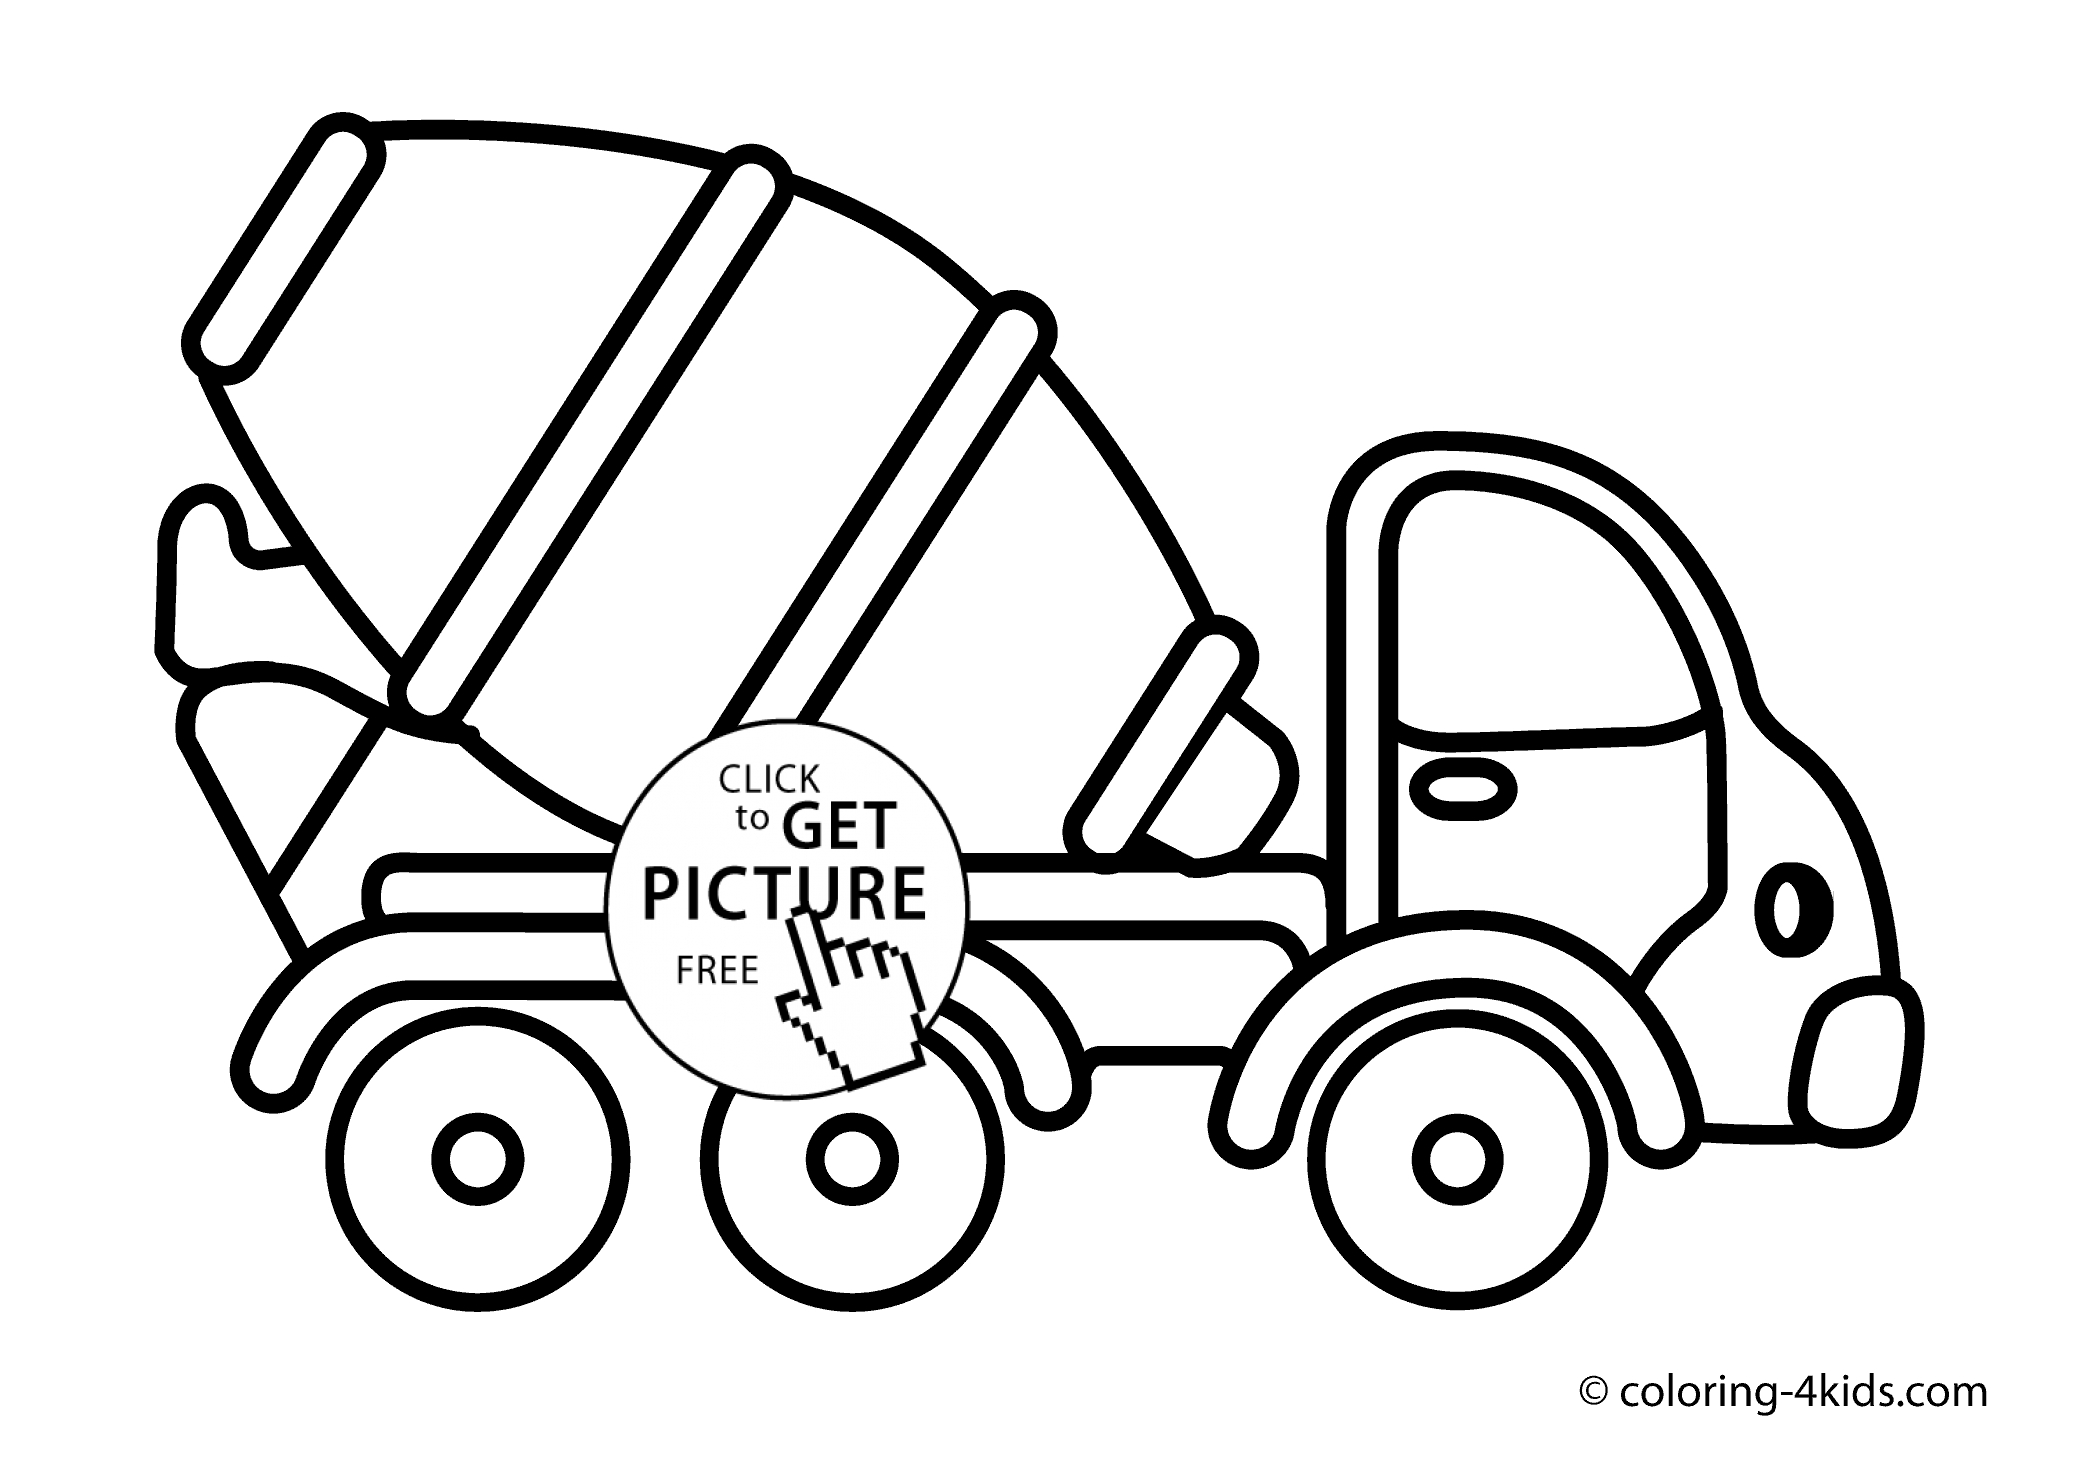 Truck Coloring Pages For Preschoolers Cement Mixer Truck Transportation Coloring Pages Concrete Truck